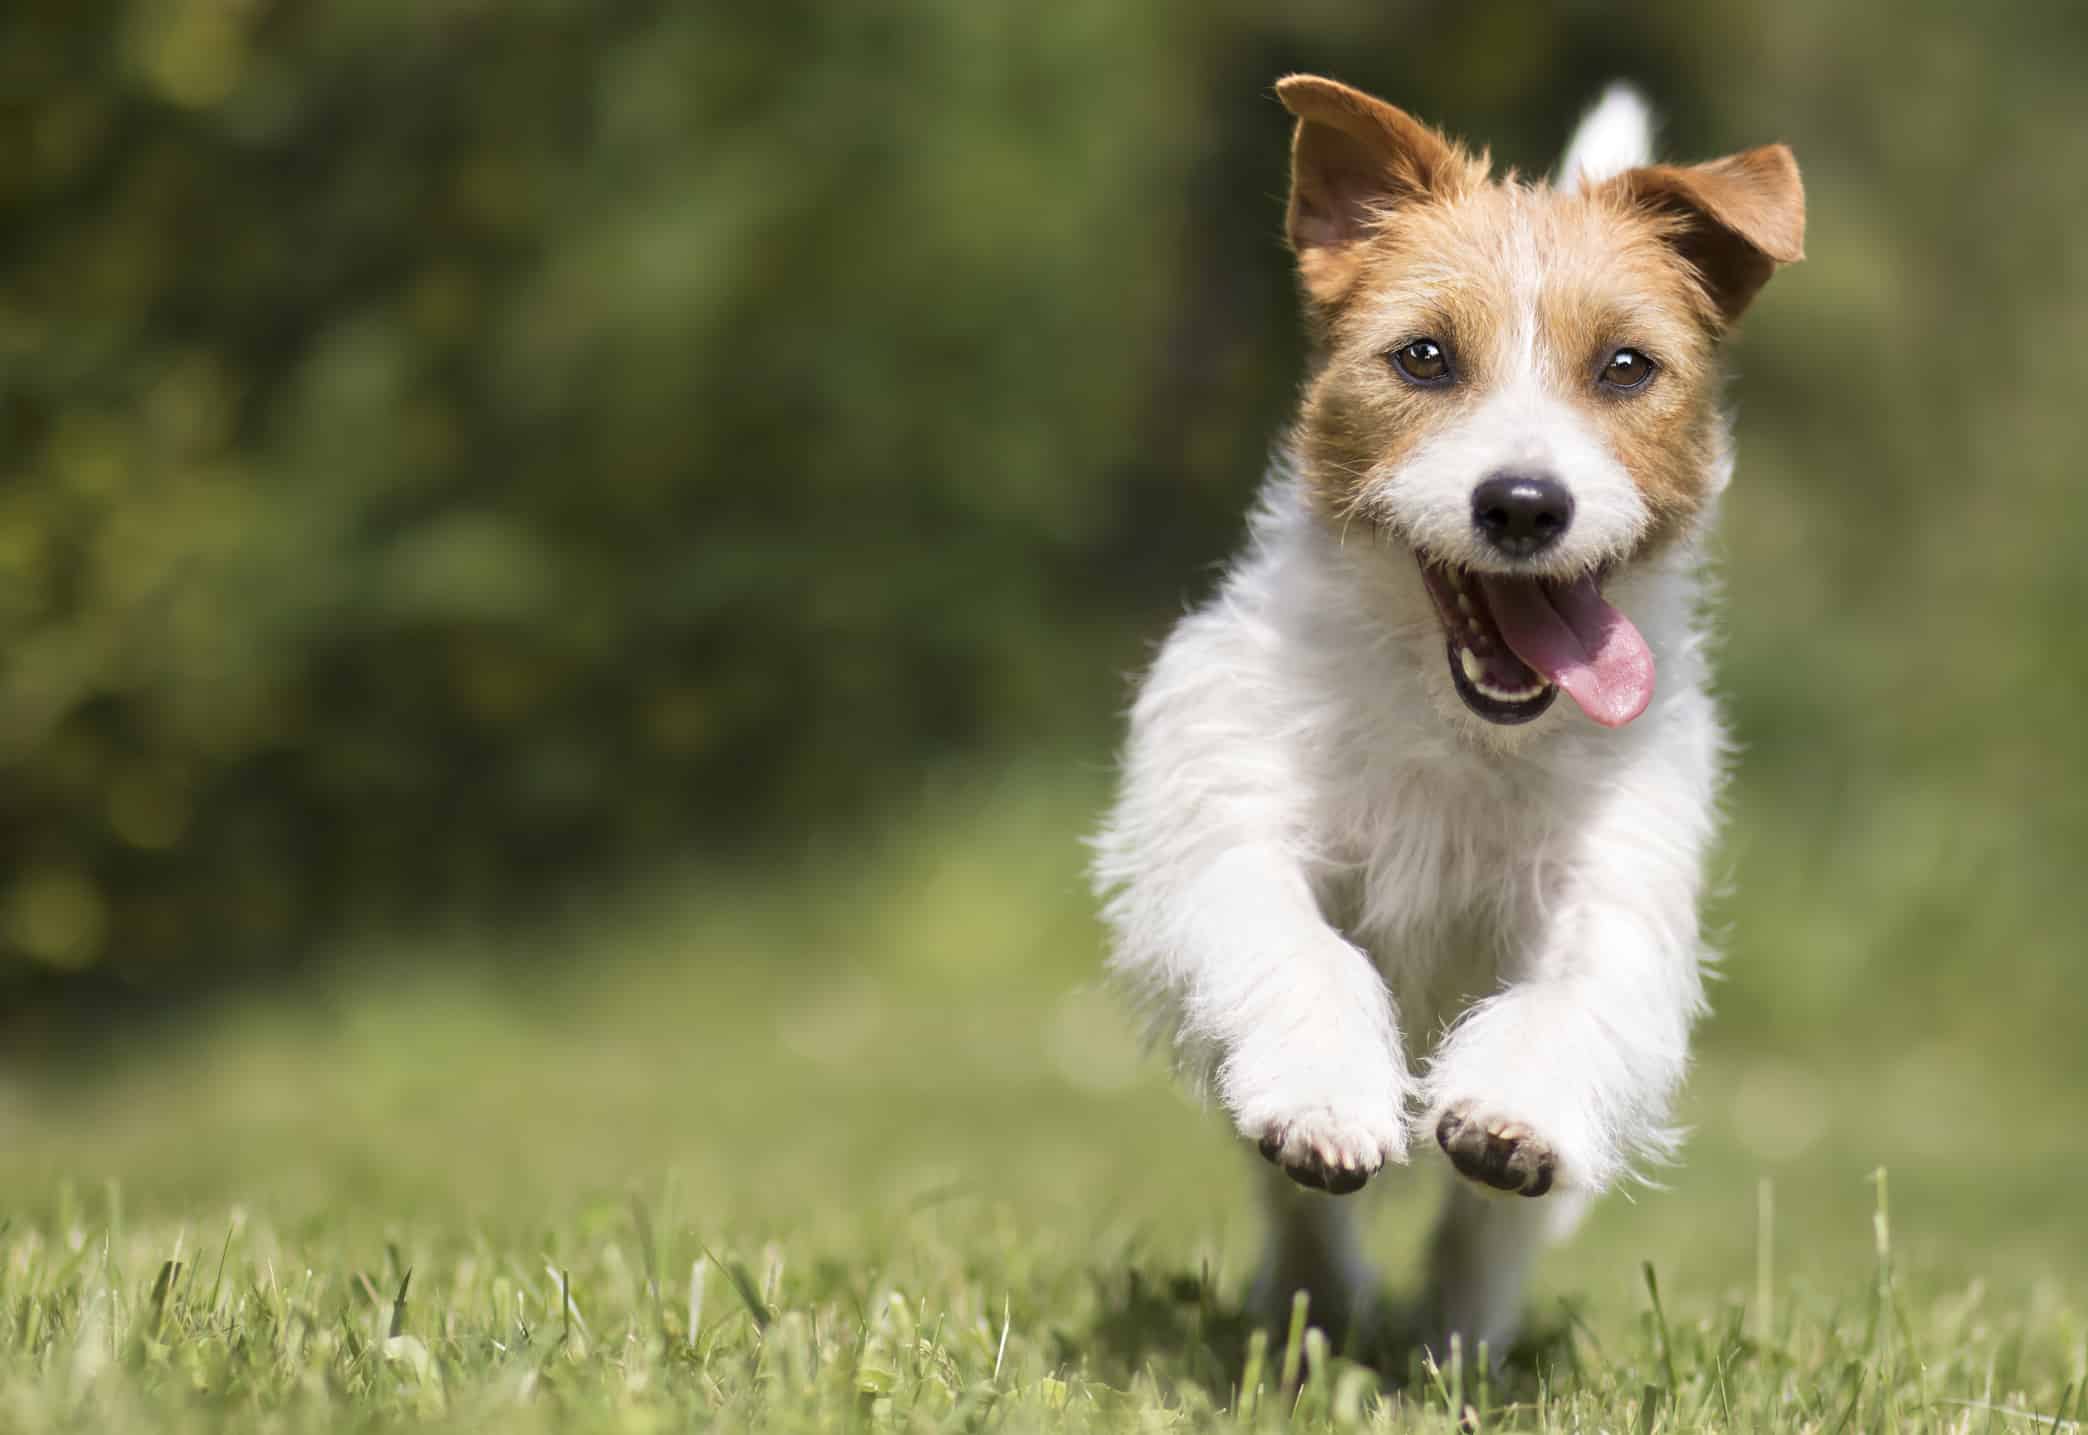 Dog-Supplements-Funny-Playful-Happy-Smiling-Pet-Dog-Puppy-Running-Jumping-In-The-Grass